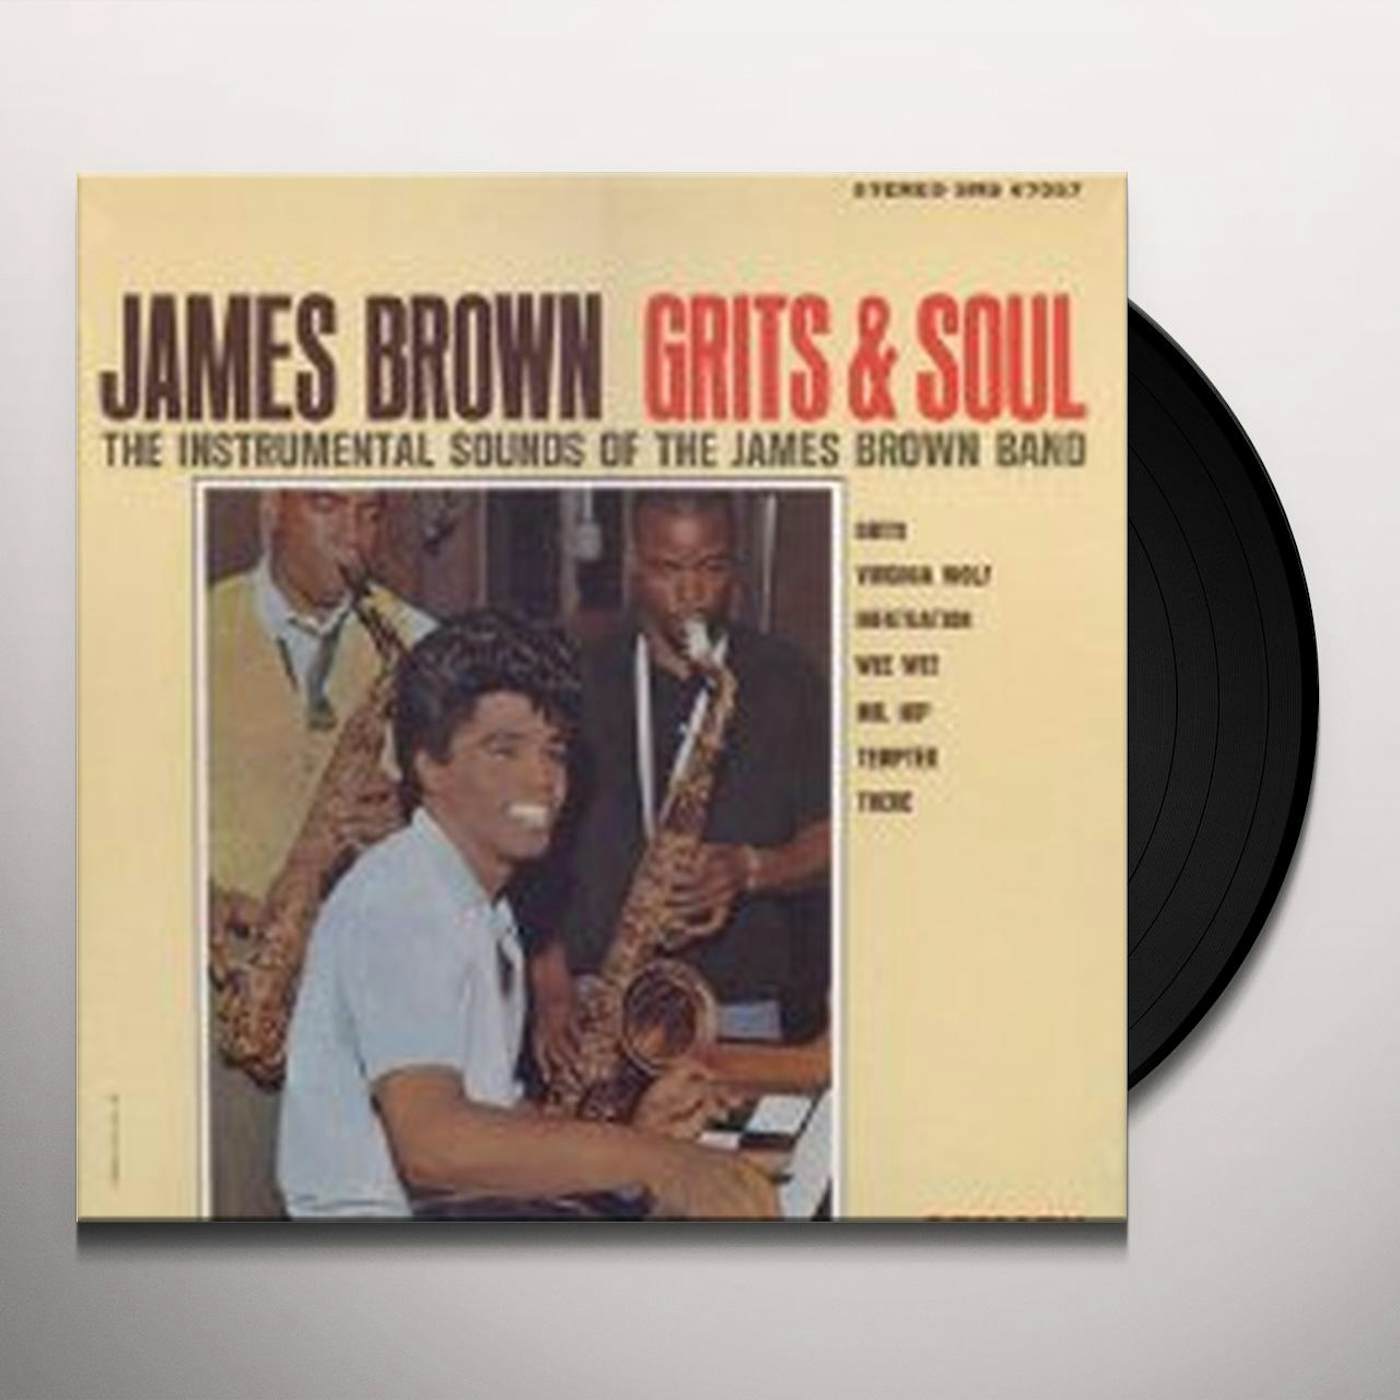 Grits MAKE A SOUND (LIKE JAMES BROWN) Vinyl Record - UK Release